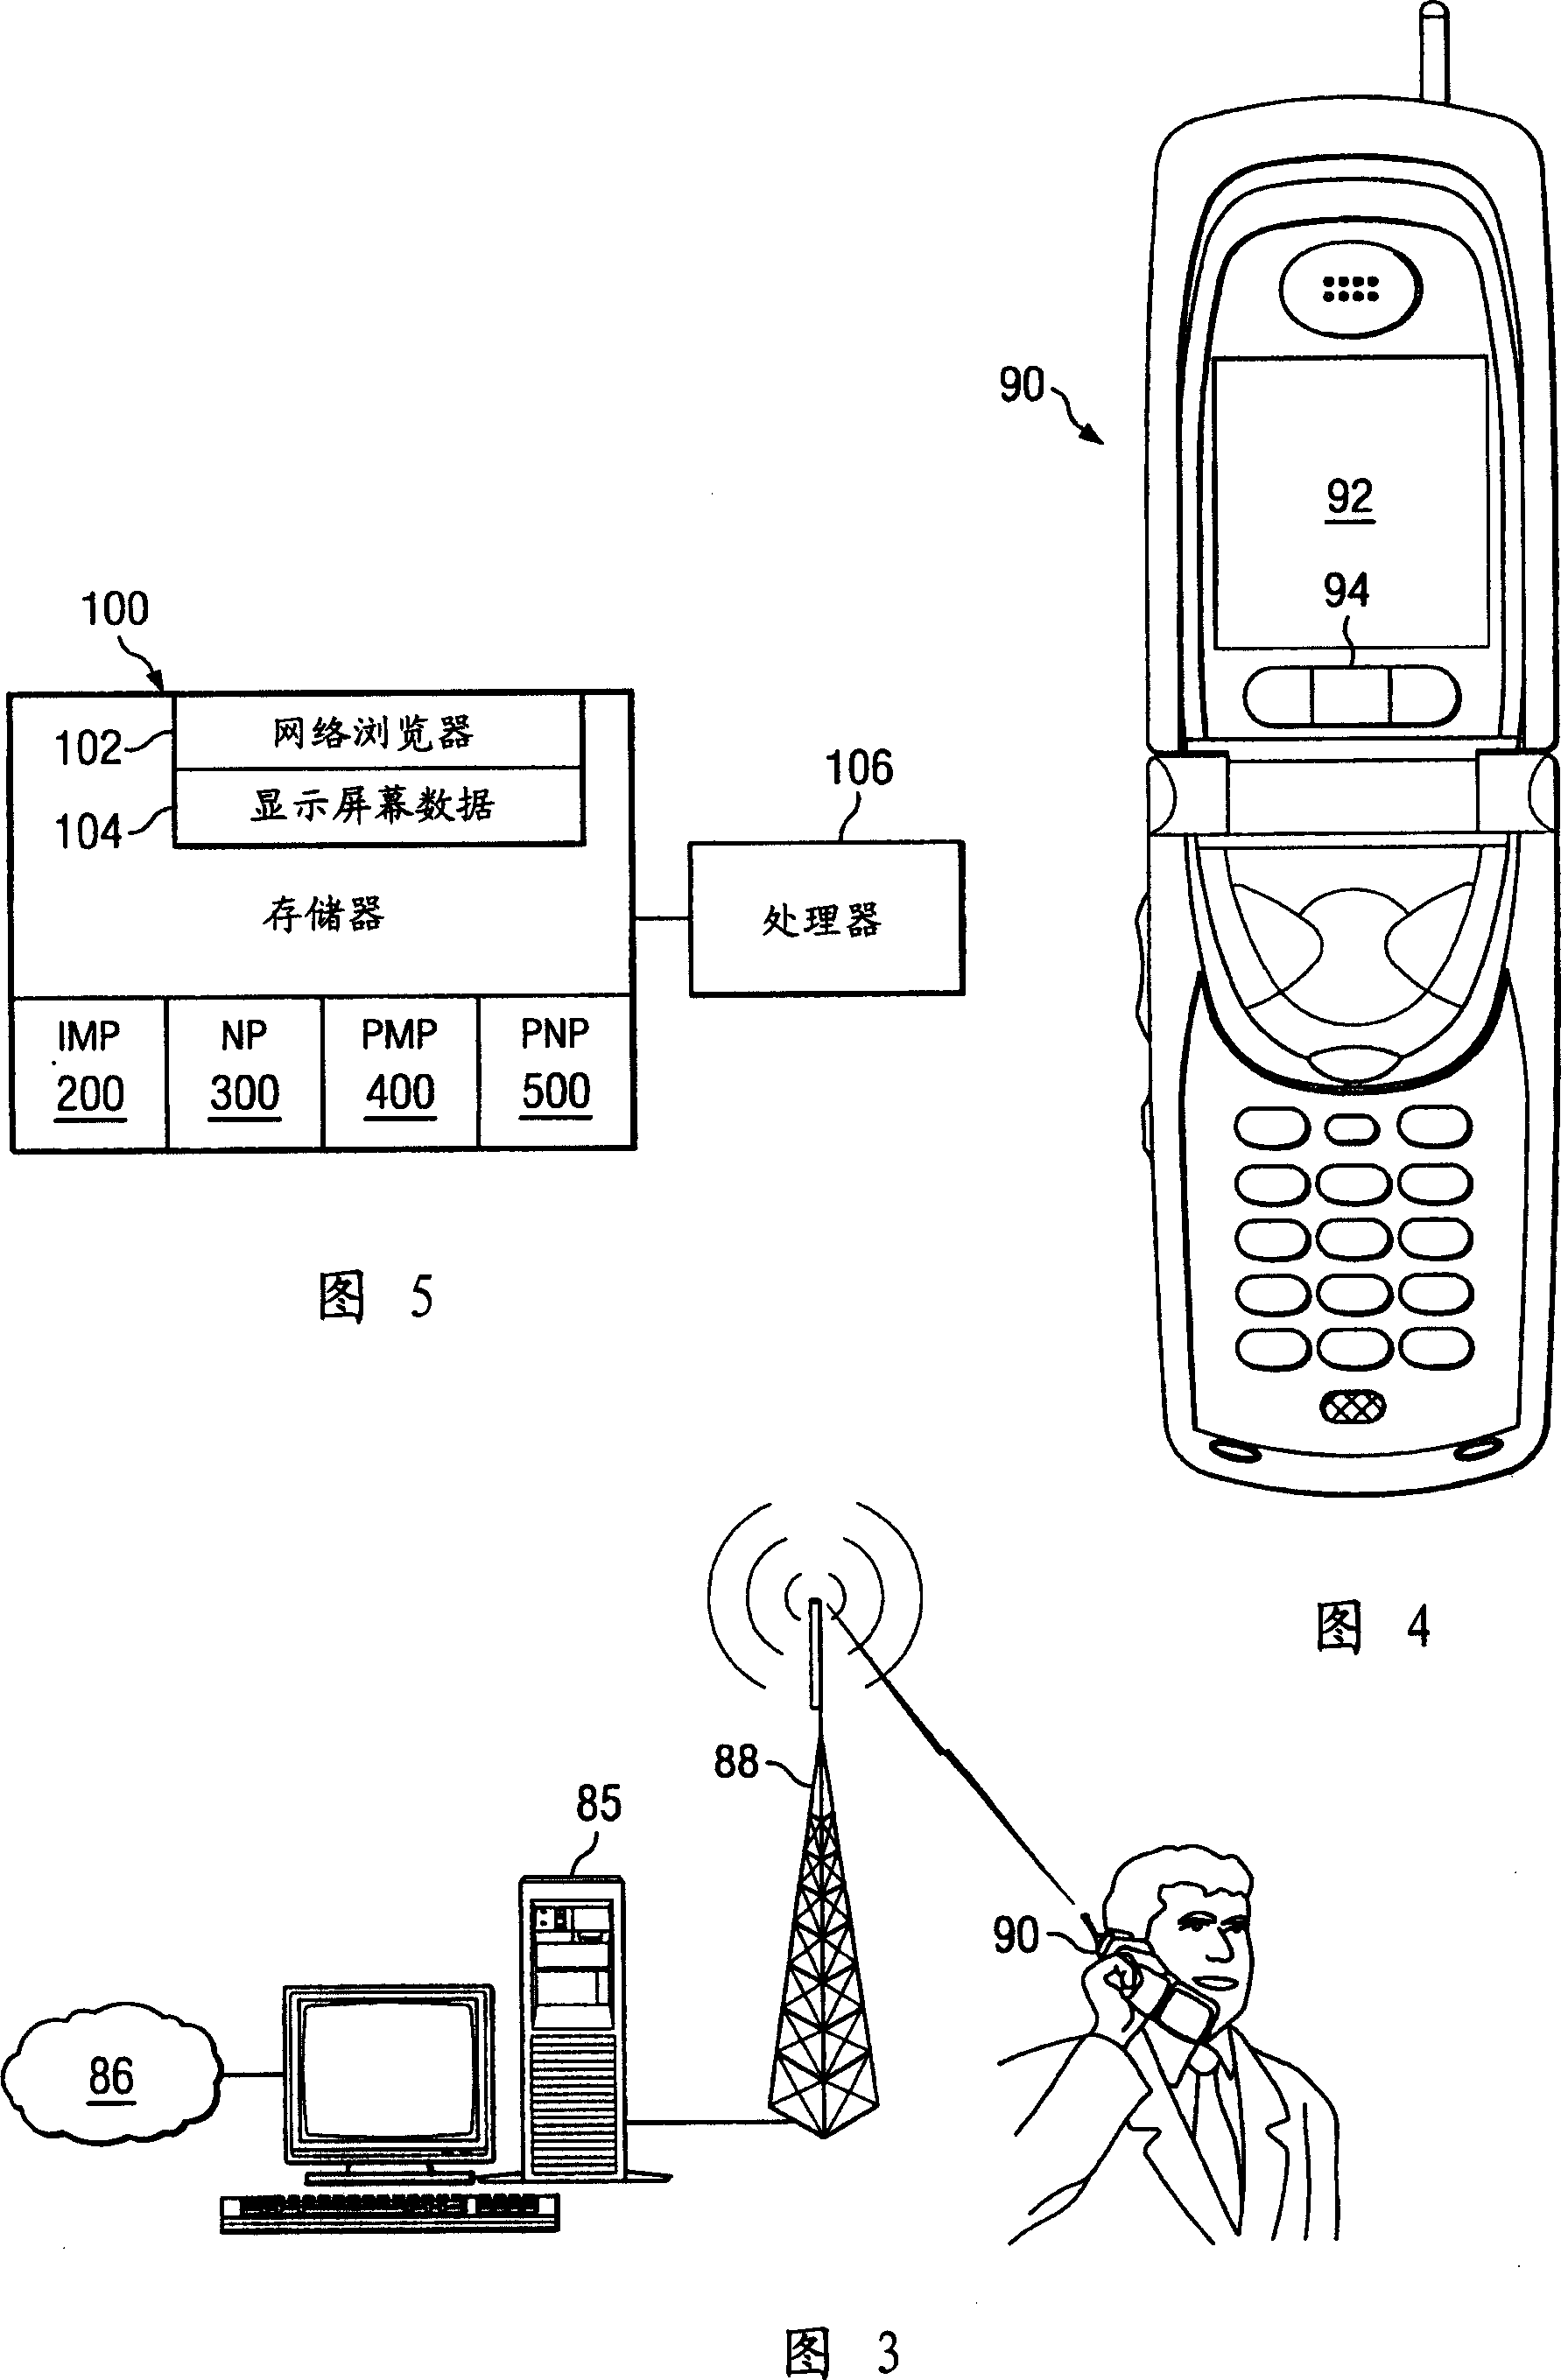 Apparatus and method for distributing portions of large web images to fit smaller constrained viewing areas